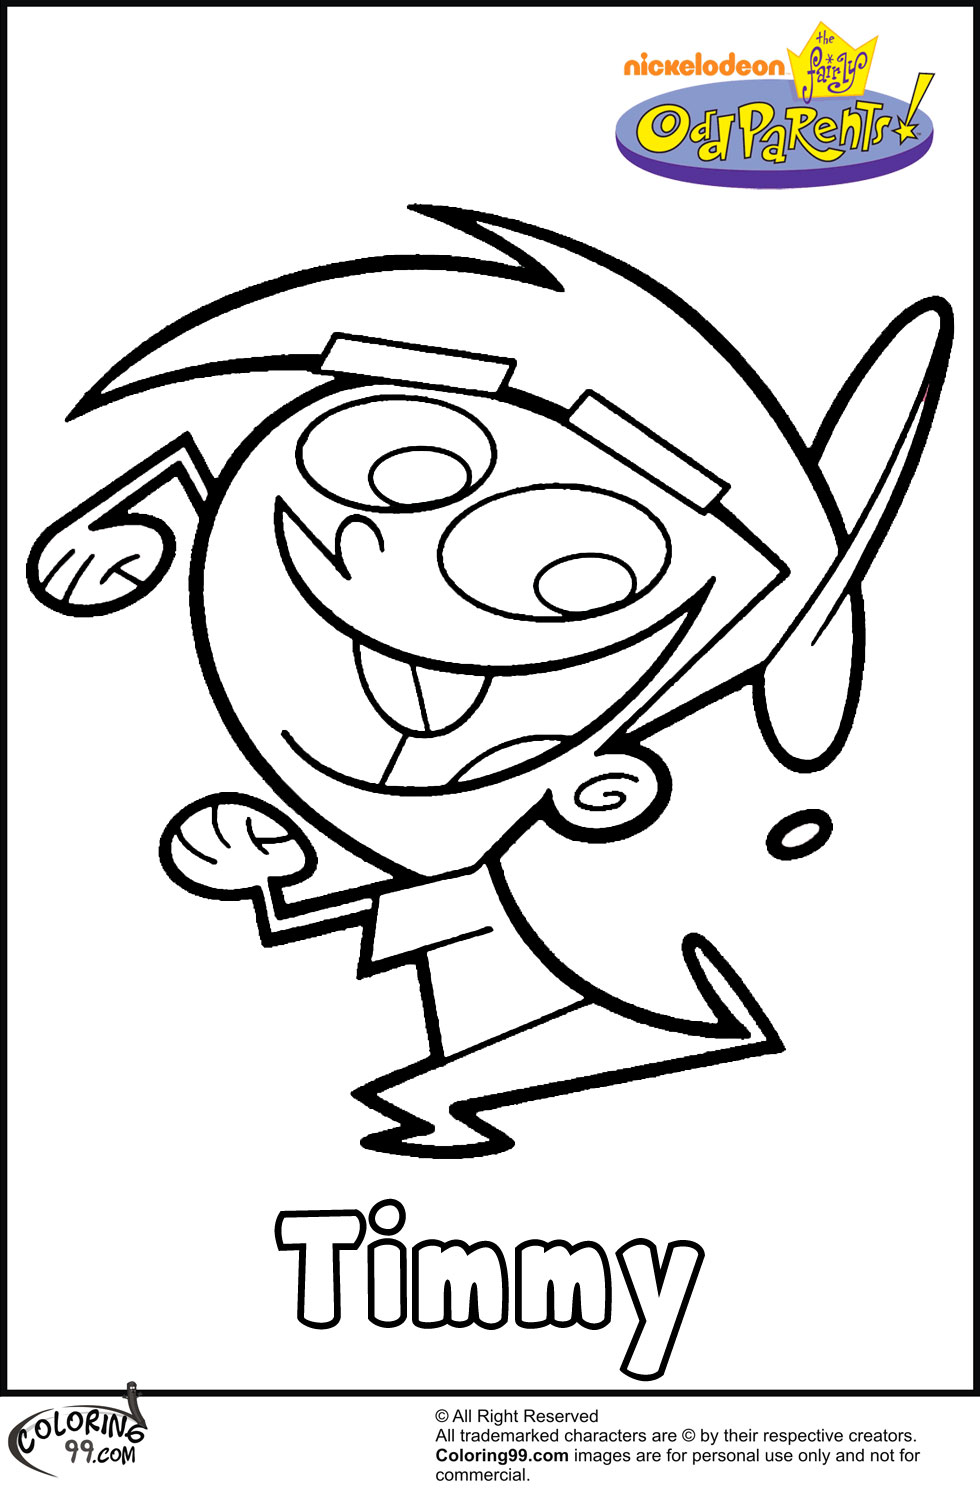 fairy oddparents coloring pages - photo #11